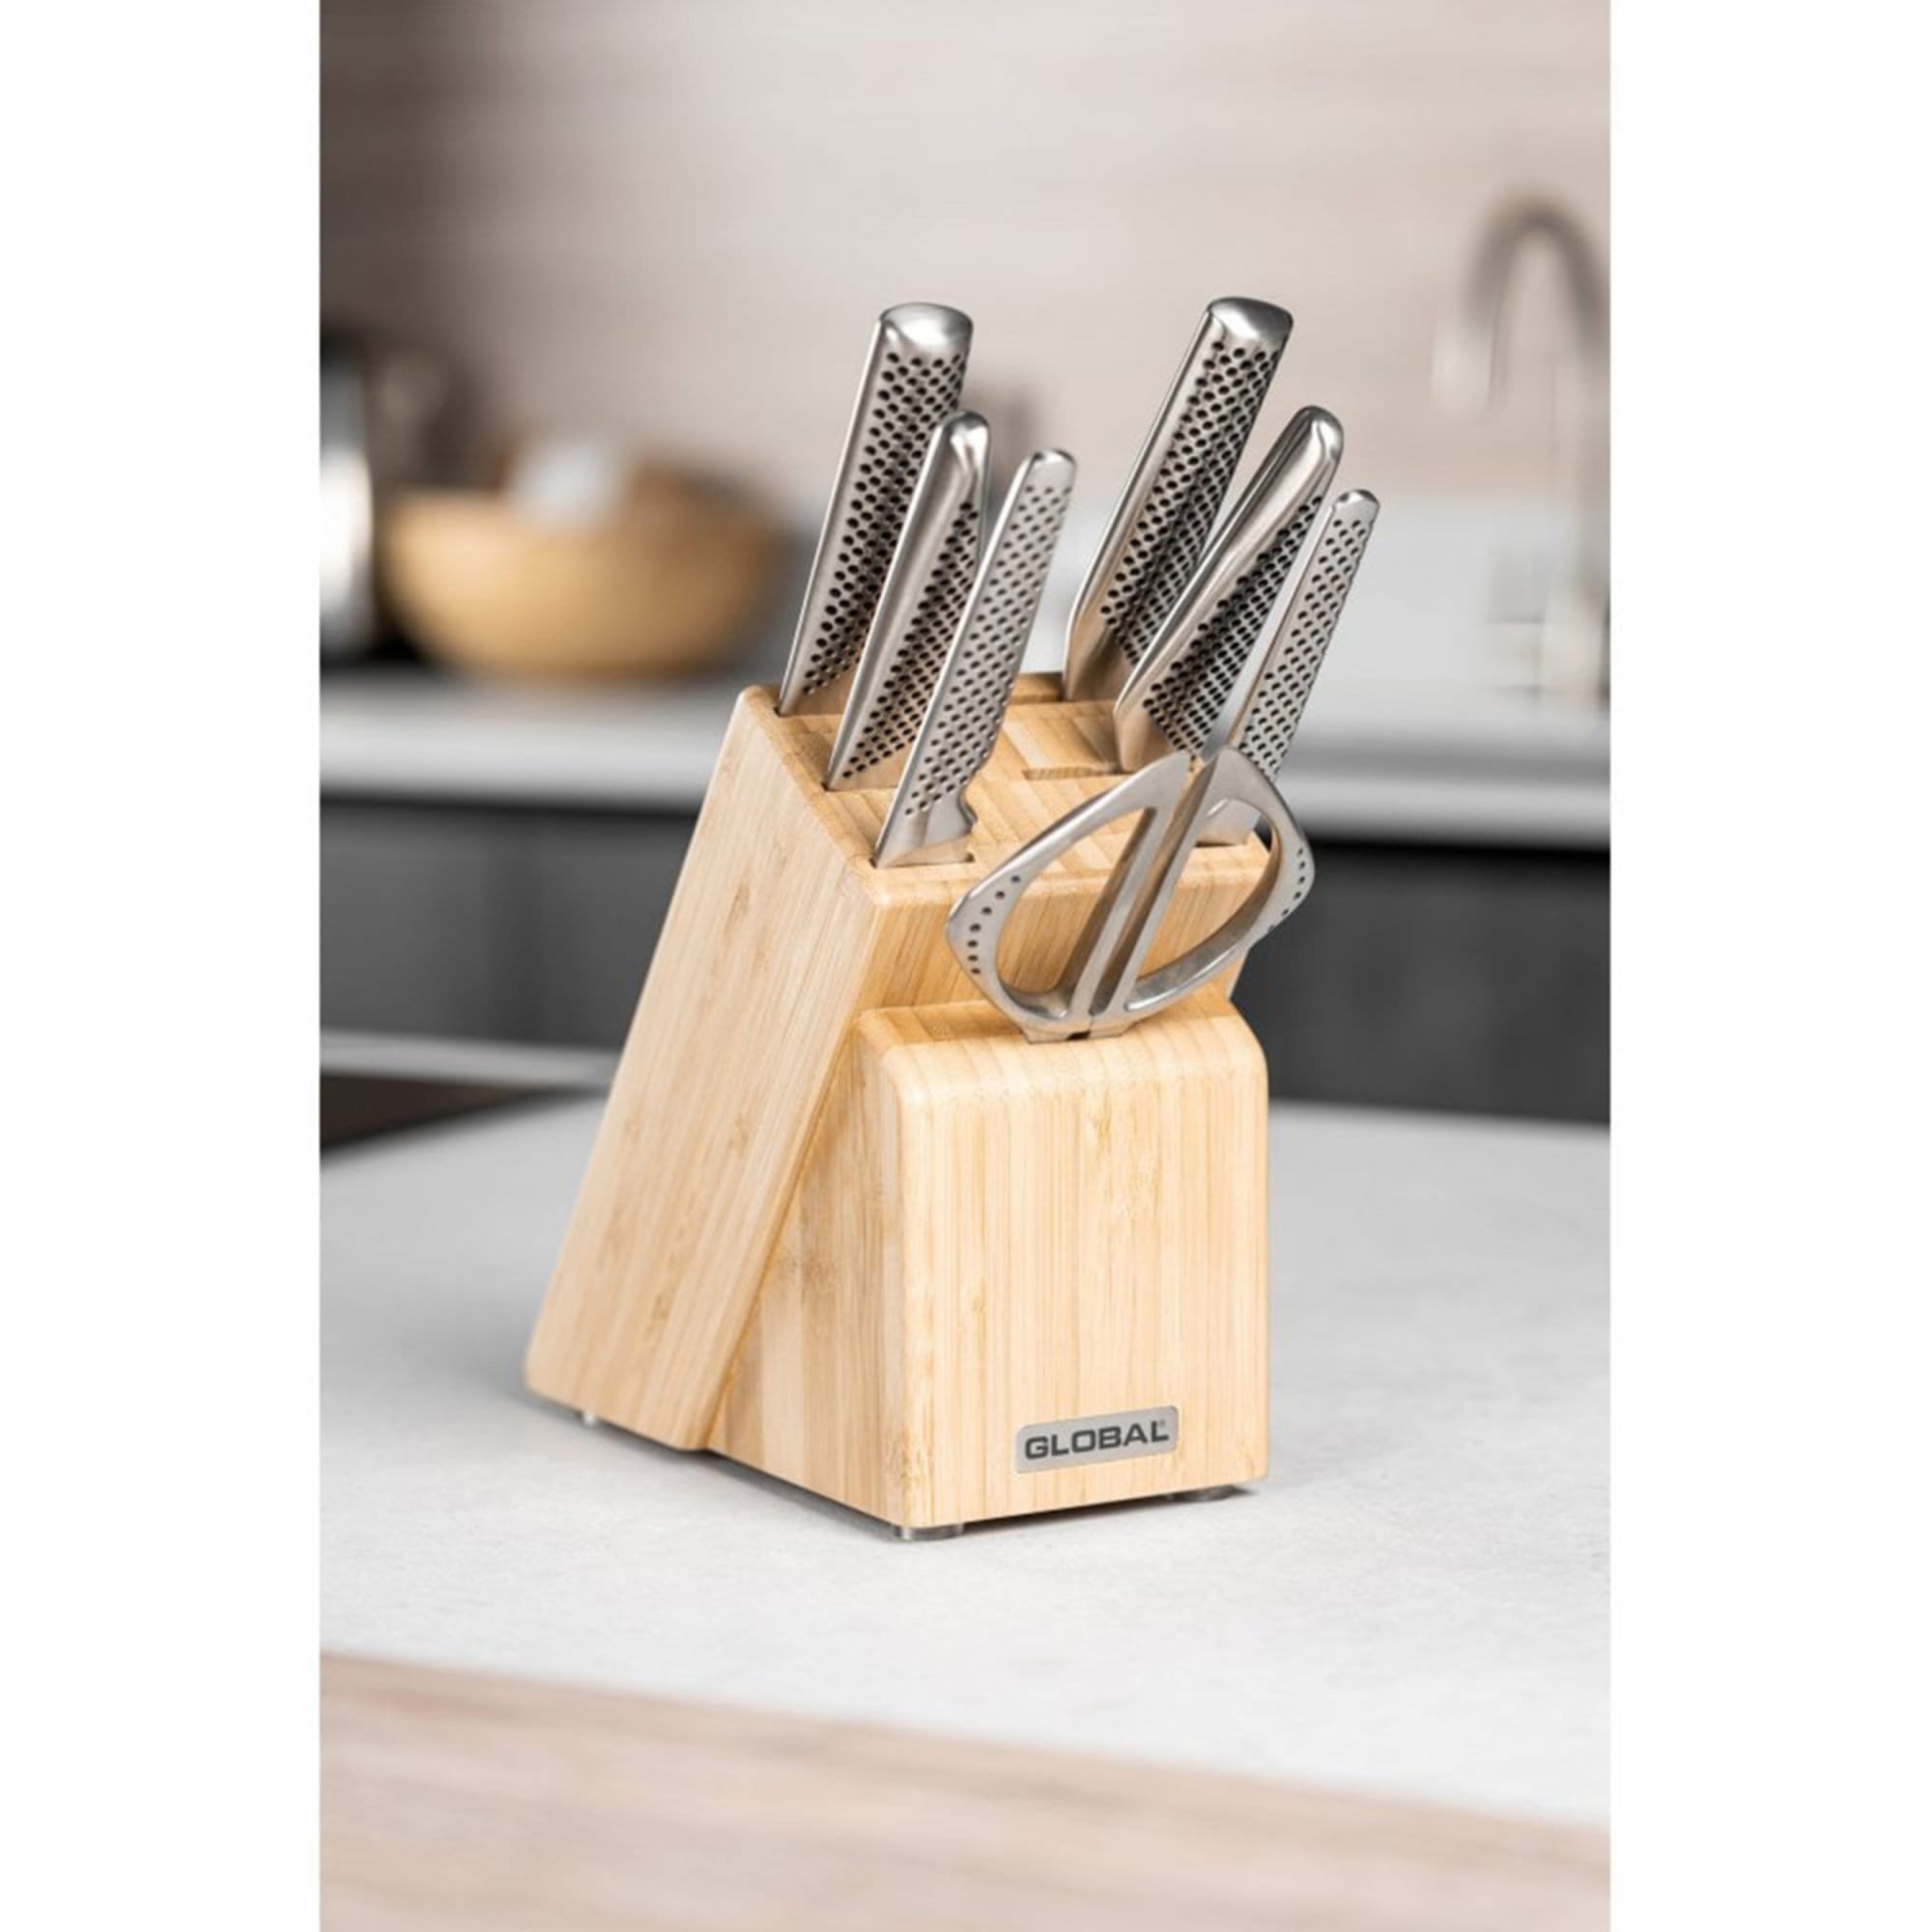 https://res.cloudinary.com/kitchenwarehouse/image/upload/c_fill,g_face,w_1250/f_auto/t_PDP_2000x2000/Supplier%20Images%20/2000px/Global-Takashi-Knife-Block-Set-8pc-Bamboo_5_2000px.jpg?imagetype=pdp_full